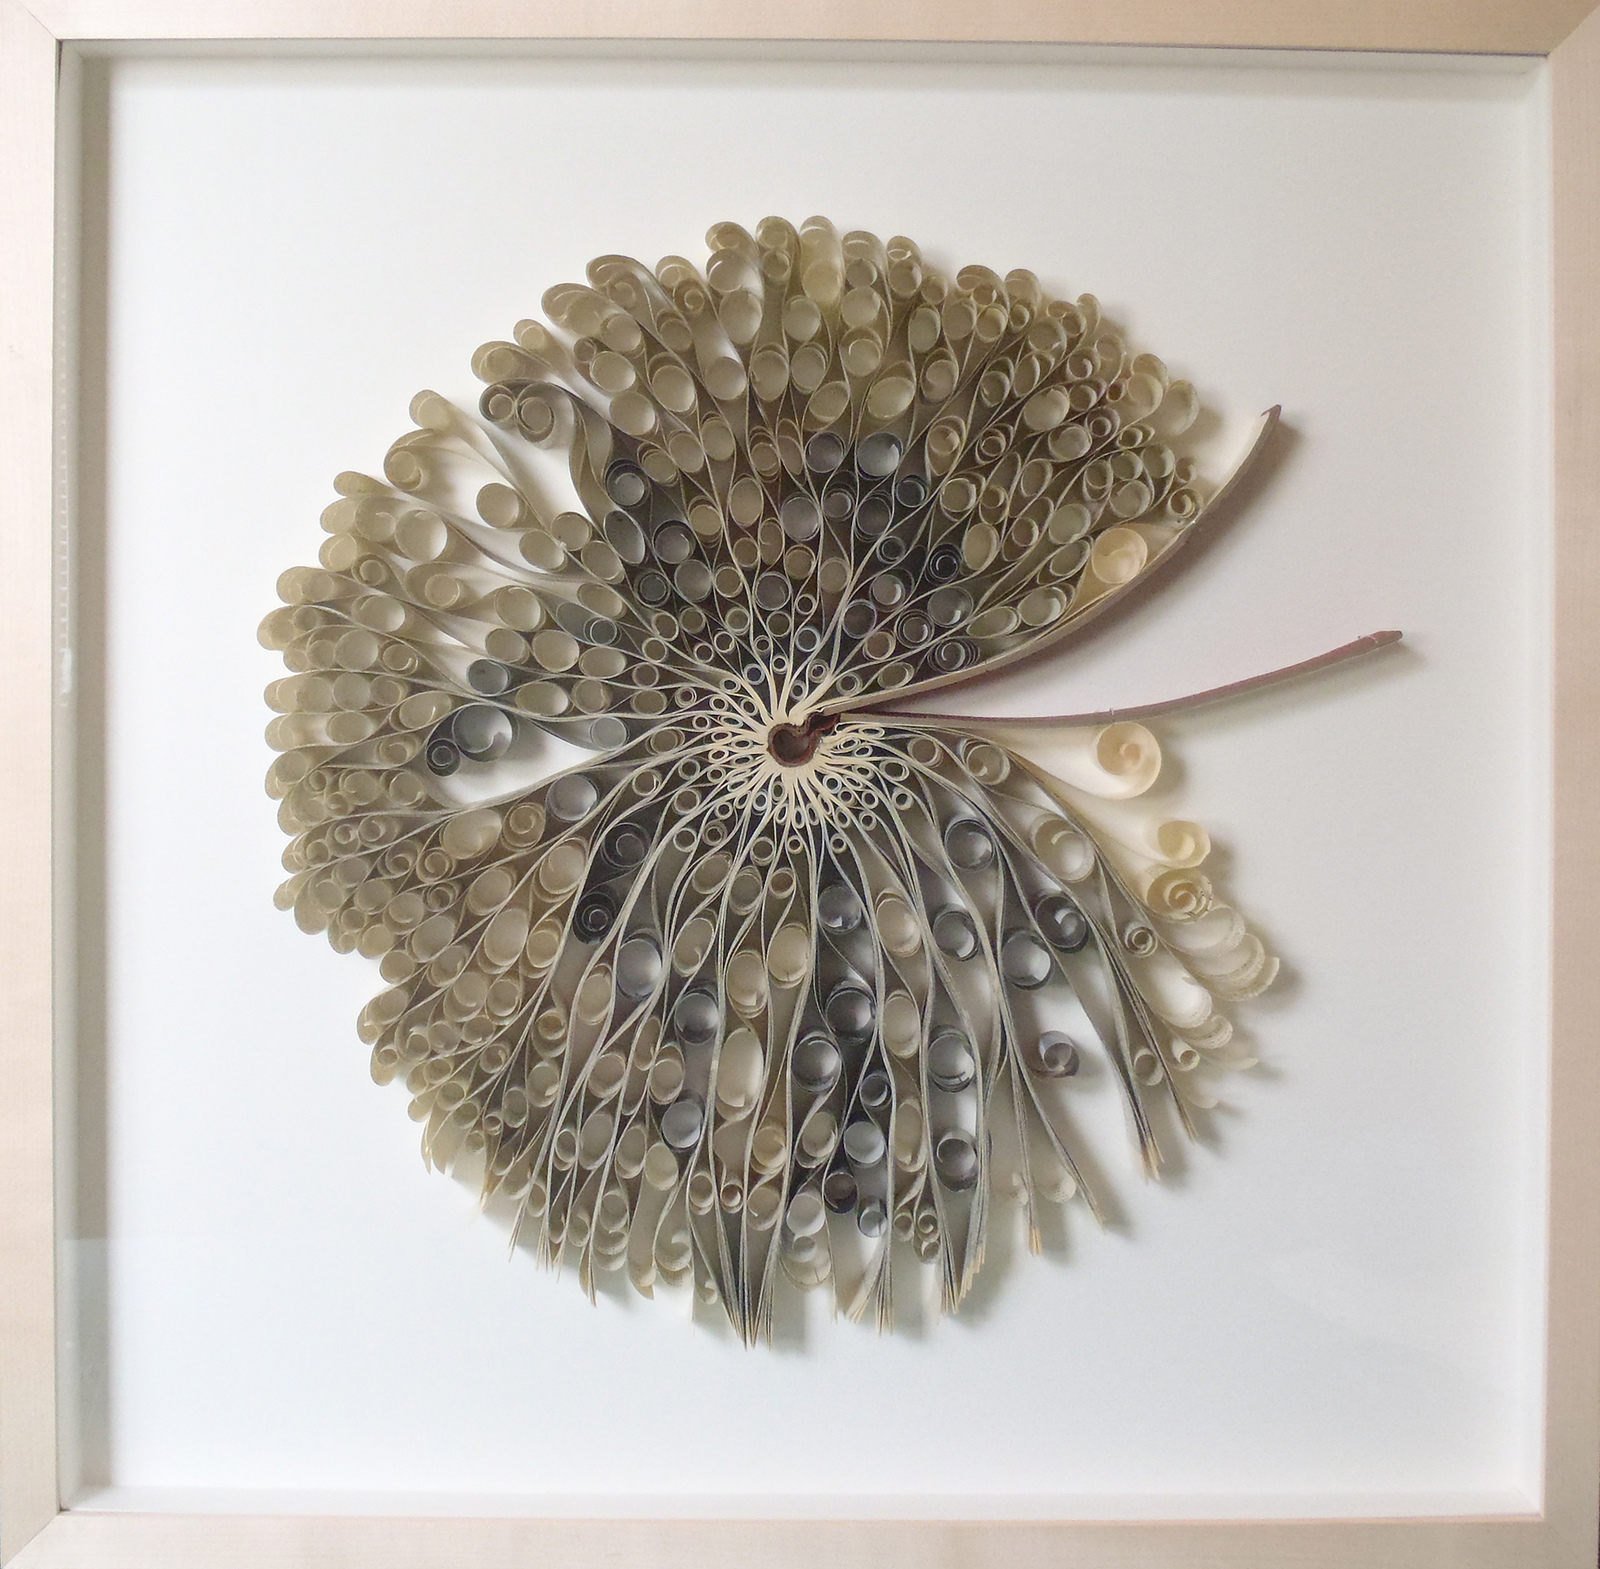 Pam Langdon – Old reconstruted book in floral art / Paper Art